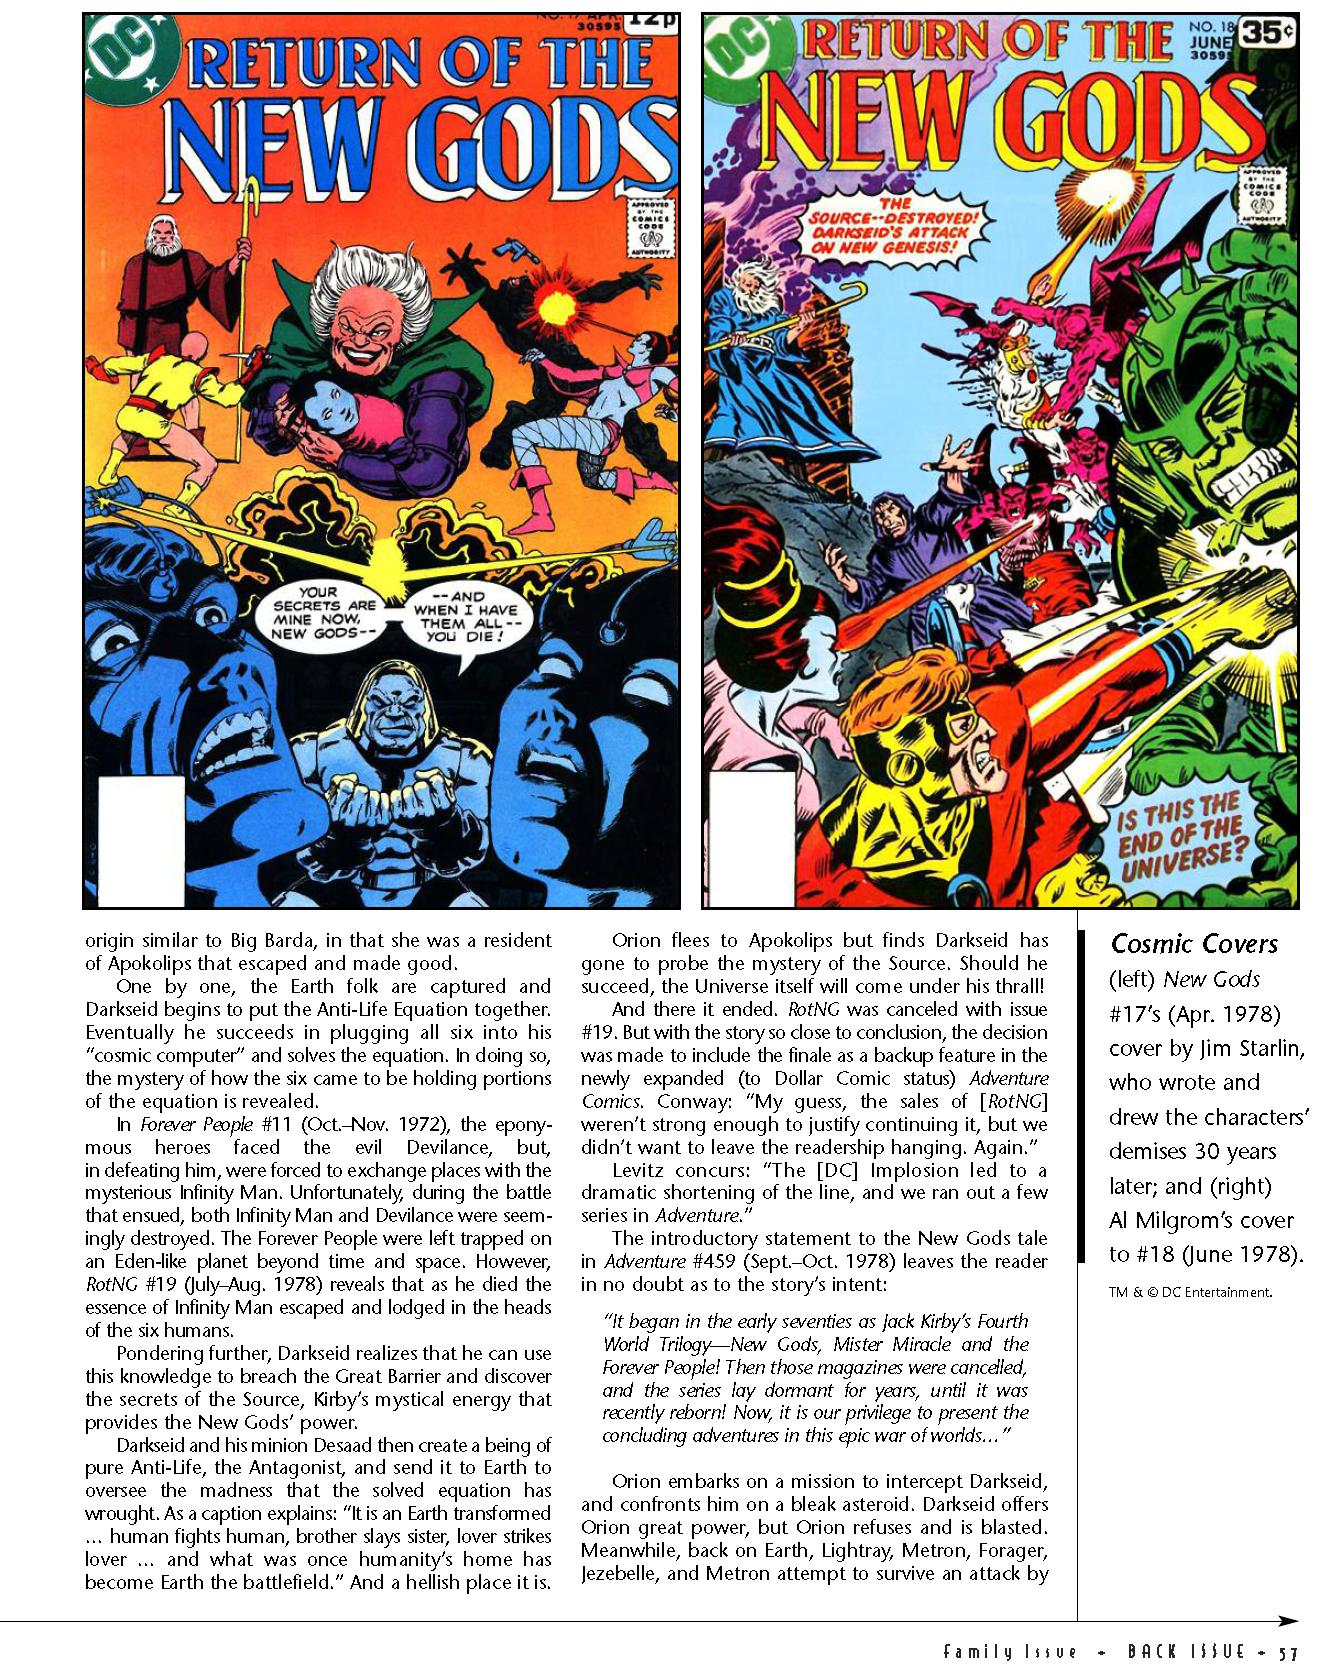 Read online Back Issue comic -  Issue #38 - 59